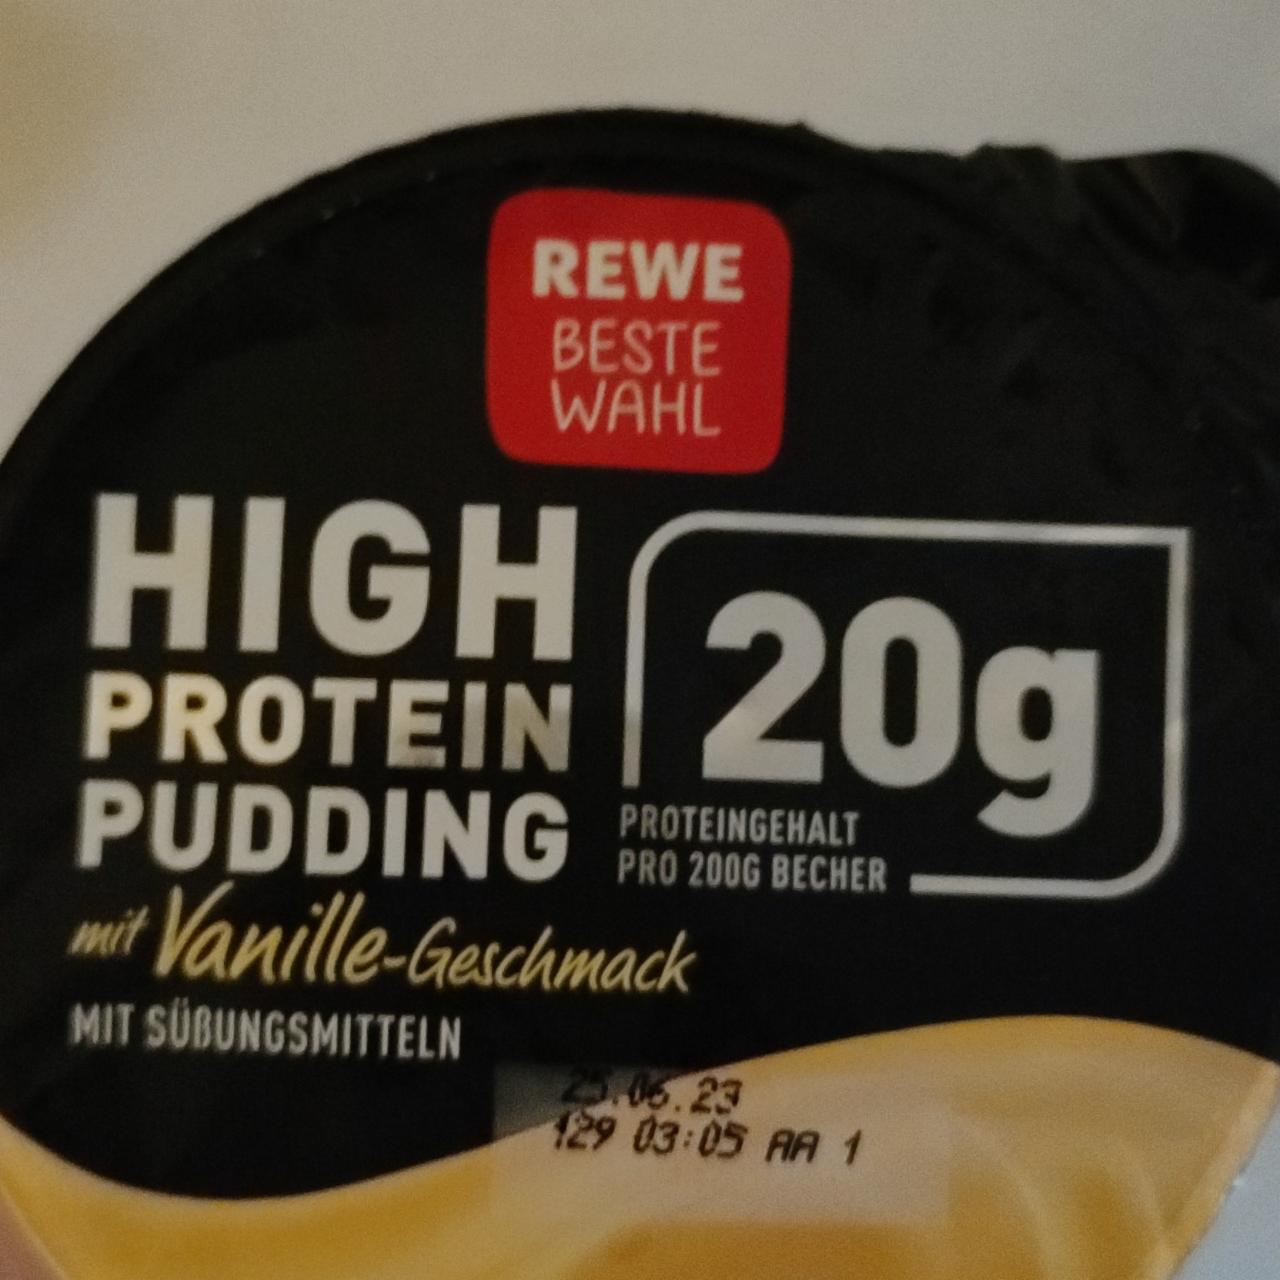 Фото - High Protein Pudding Vanille Rewe Beste Wahl